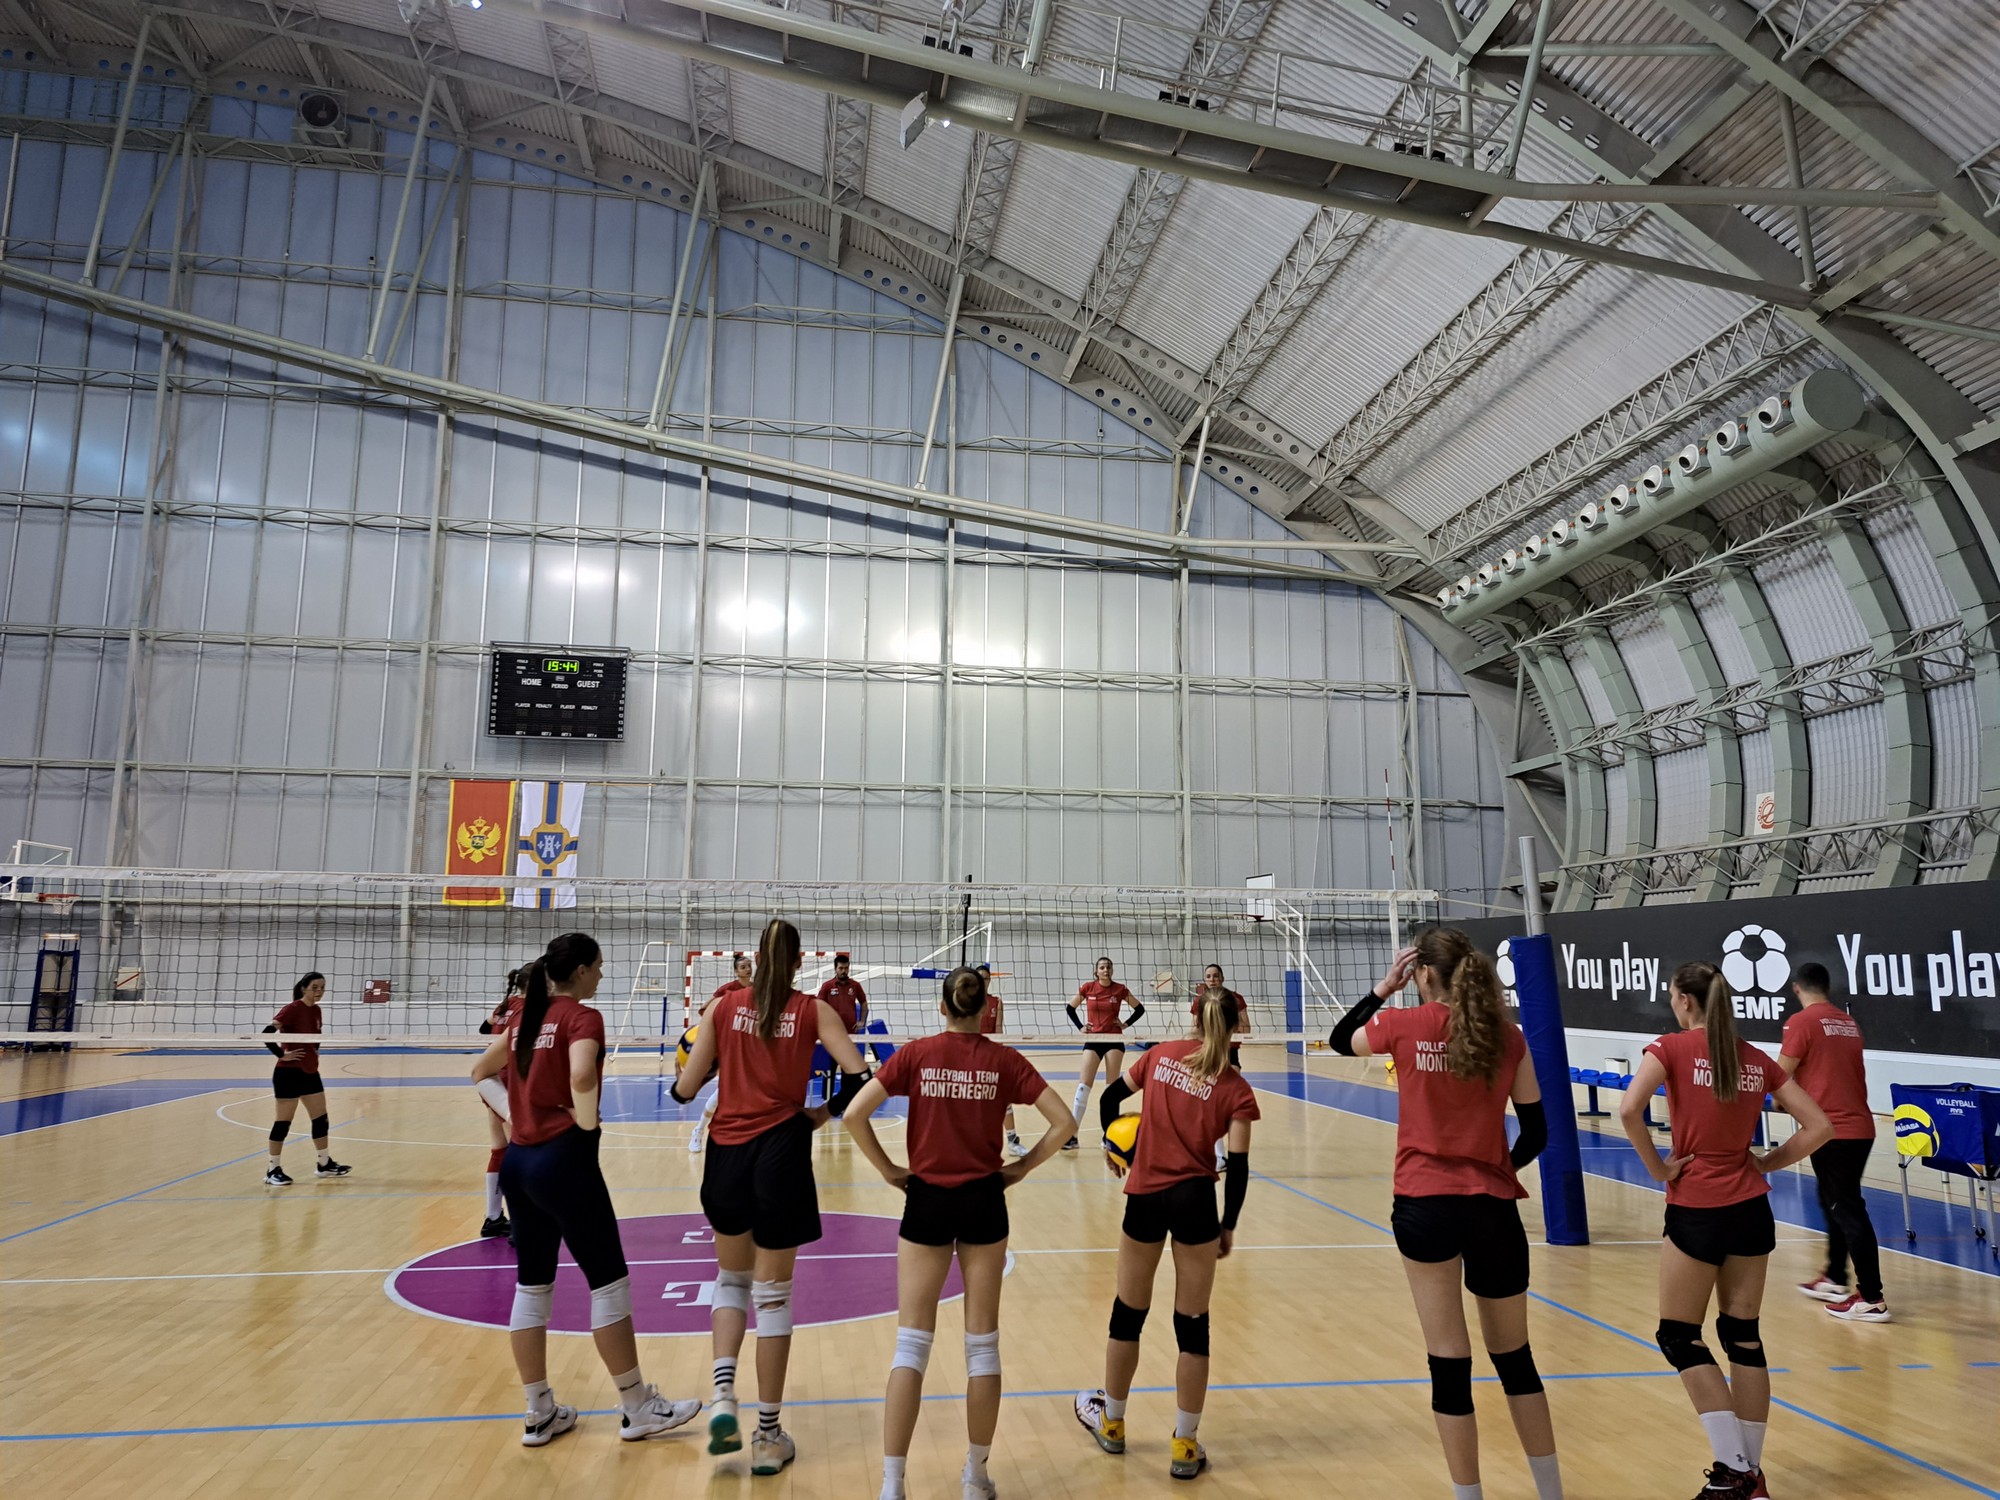 Volleyball Training Camp - High Intensity Volleyball Center